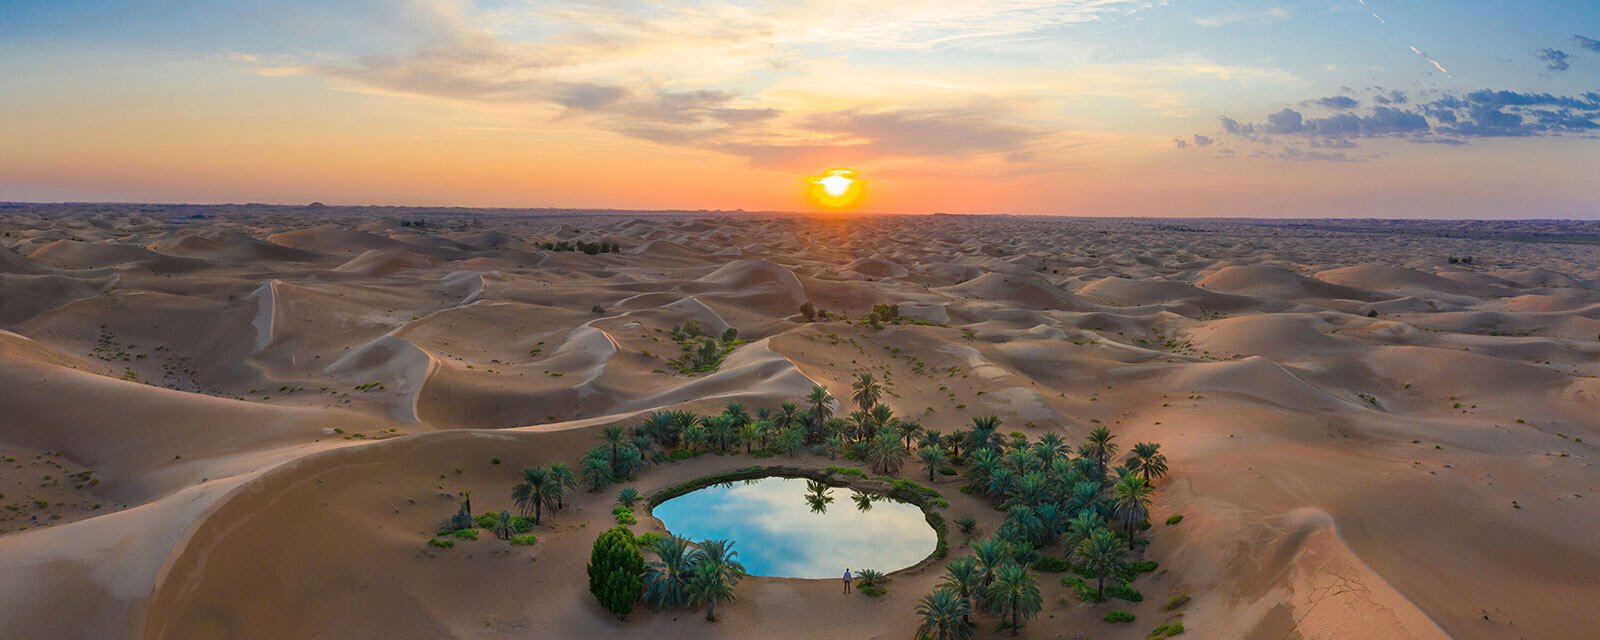 10 places to see the sunset in abu dhabi